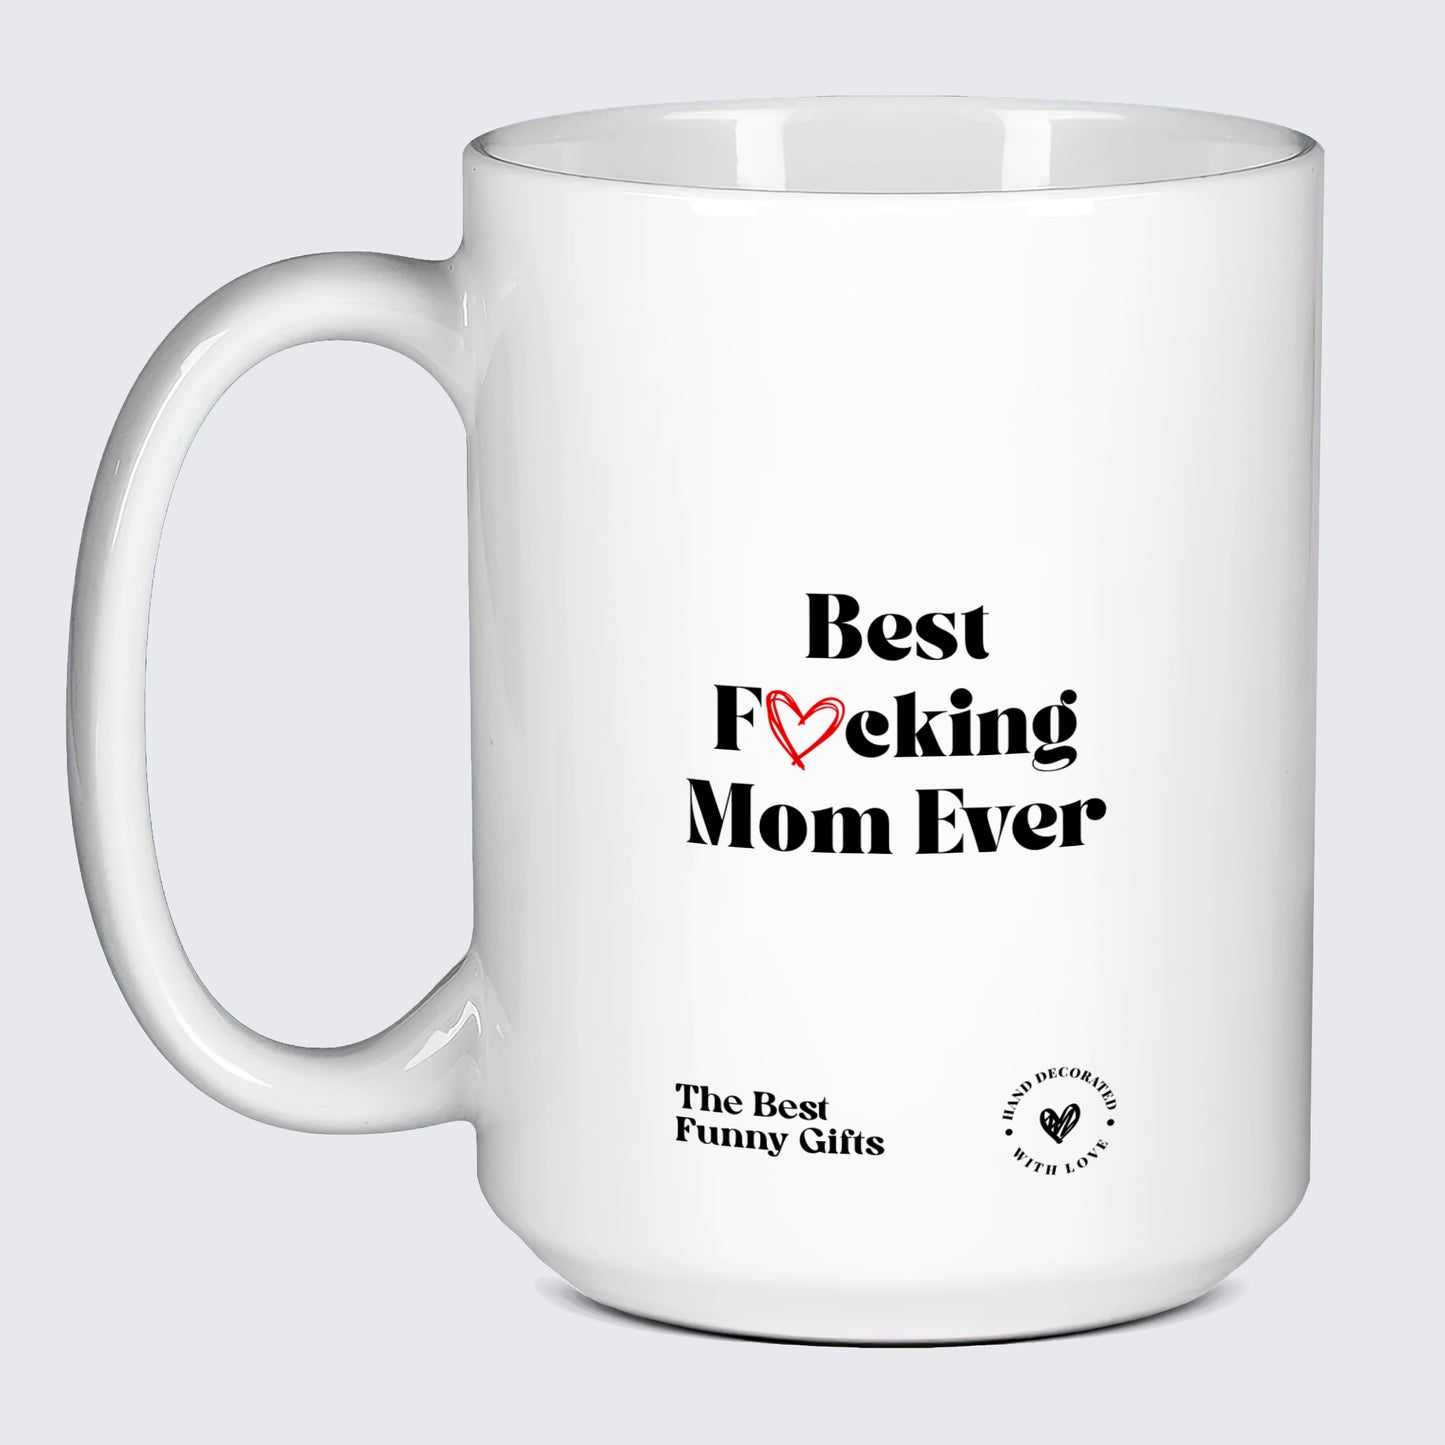 Mugs For Mom Best Fucking Mom Ever - The Best Funny Gifts